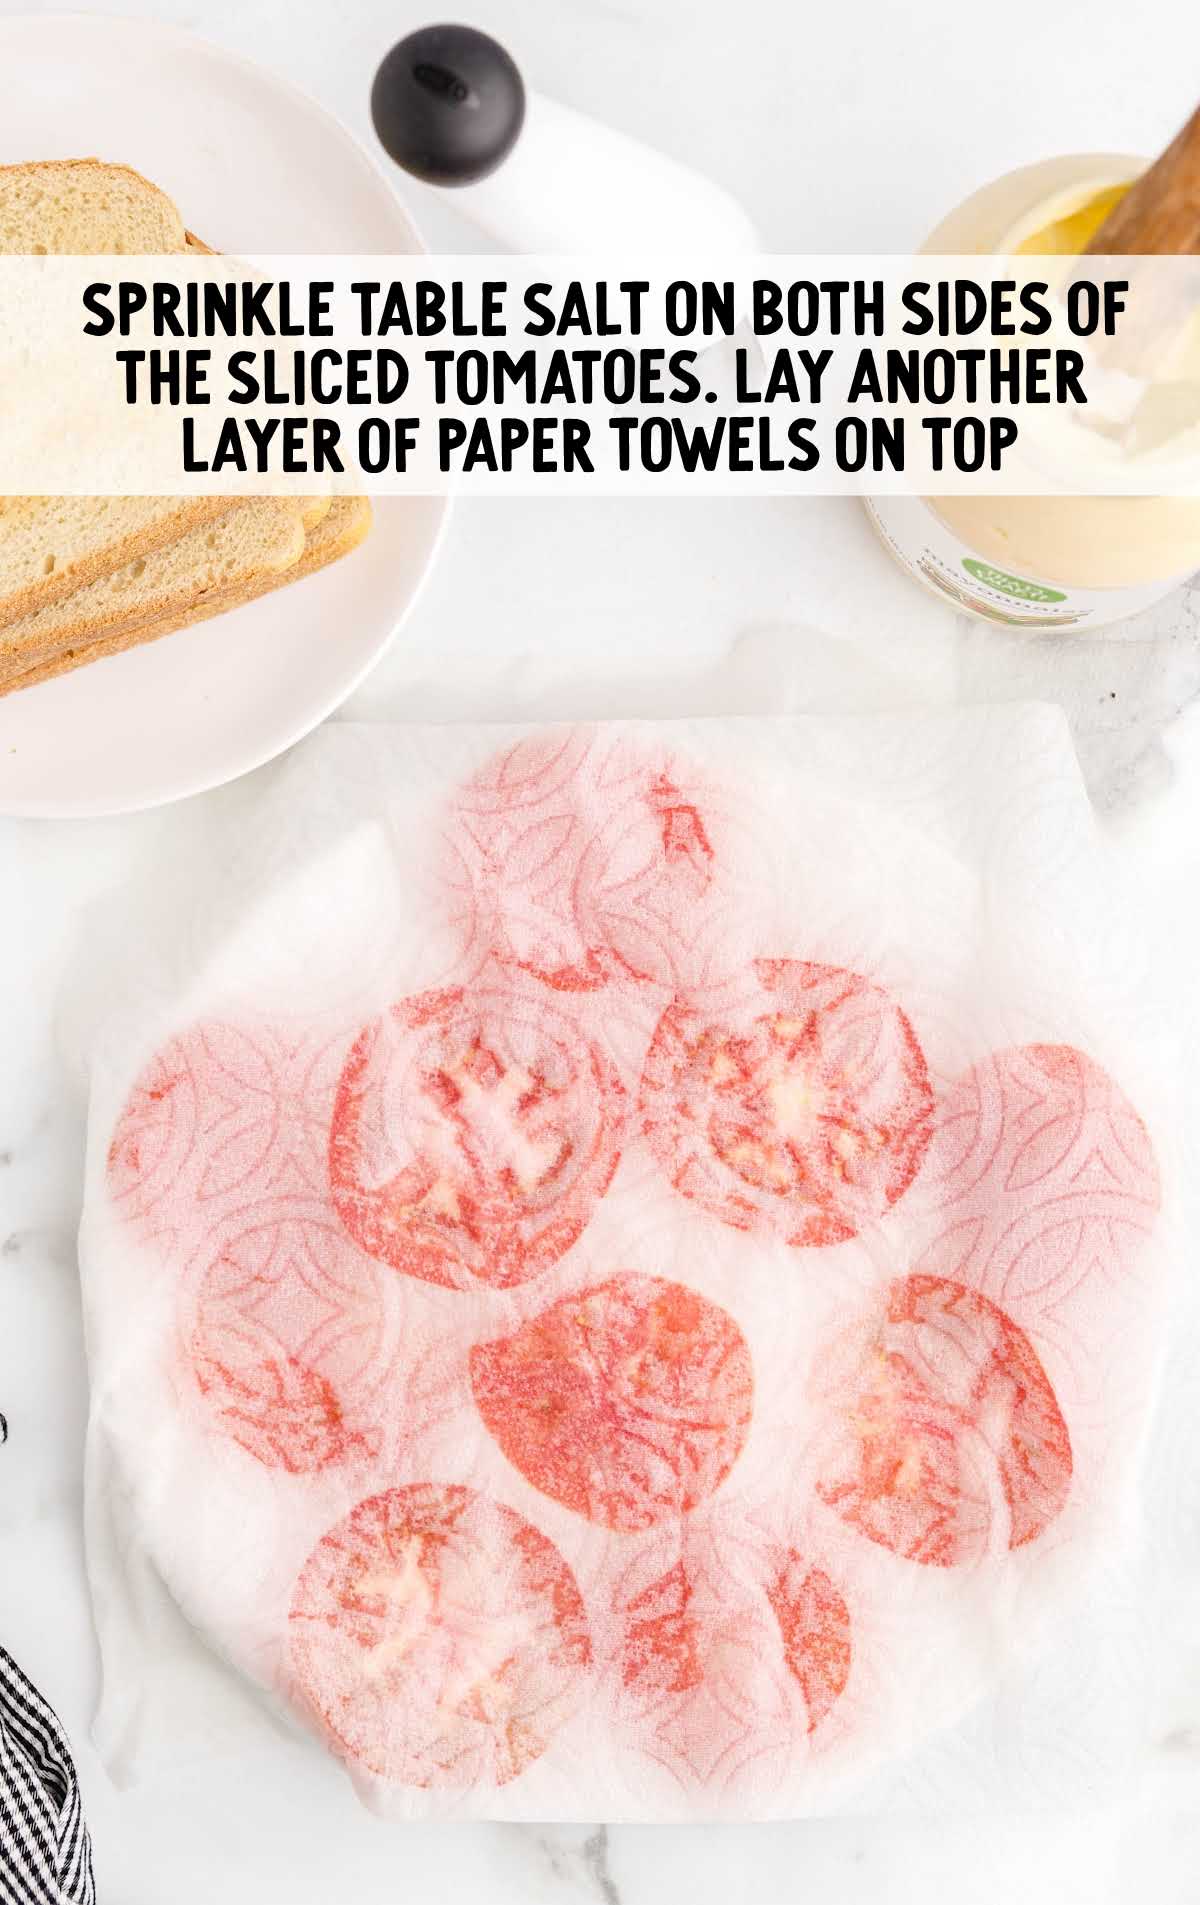 tomatoes laid on a paper towel